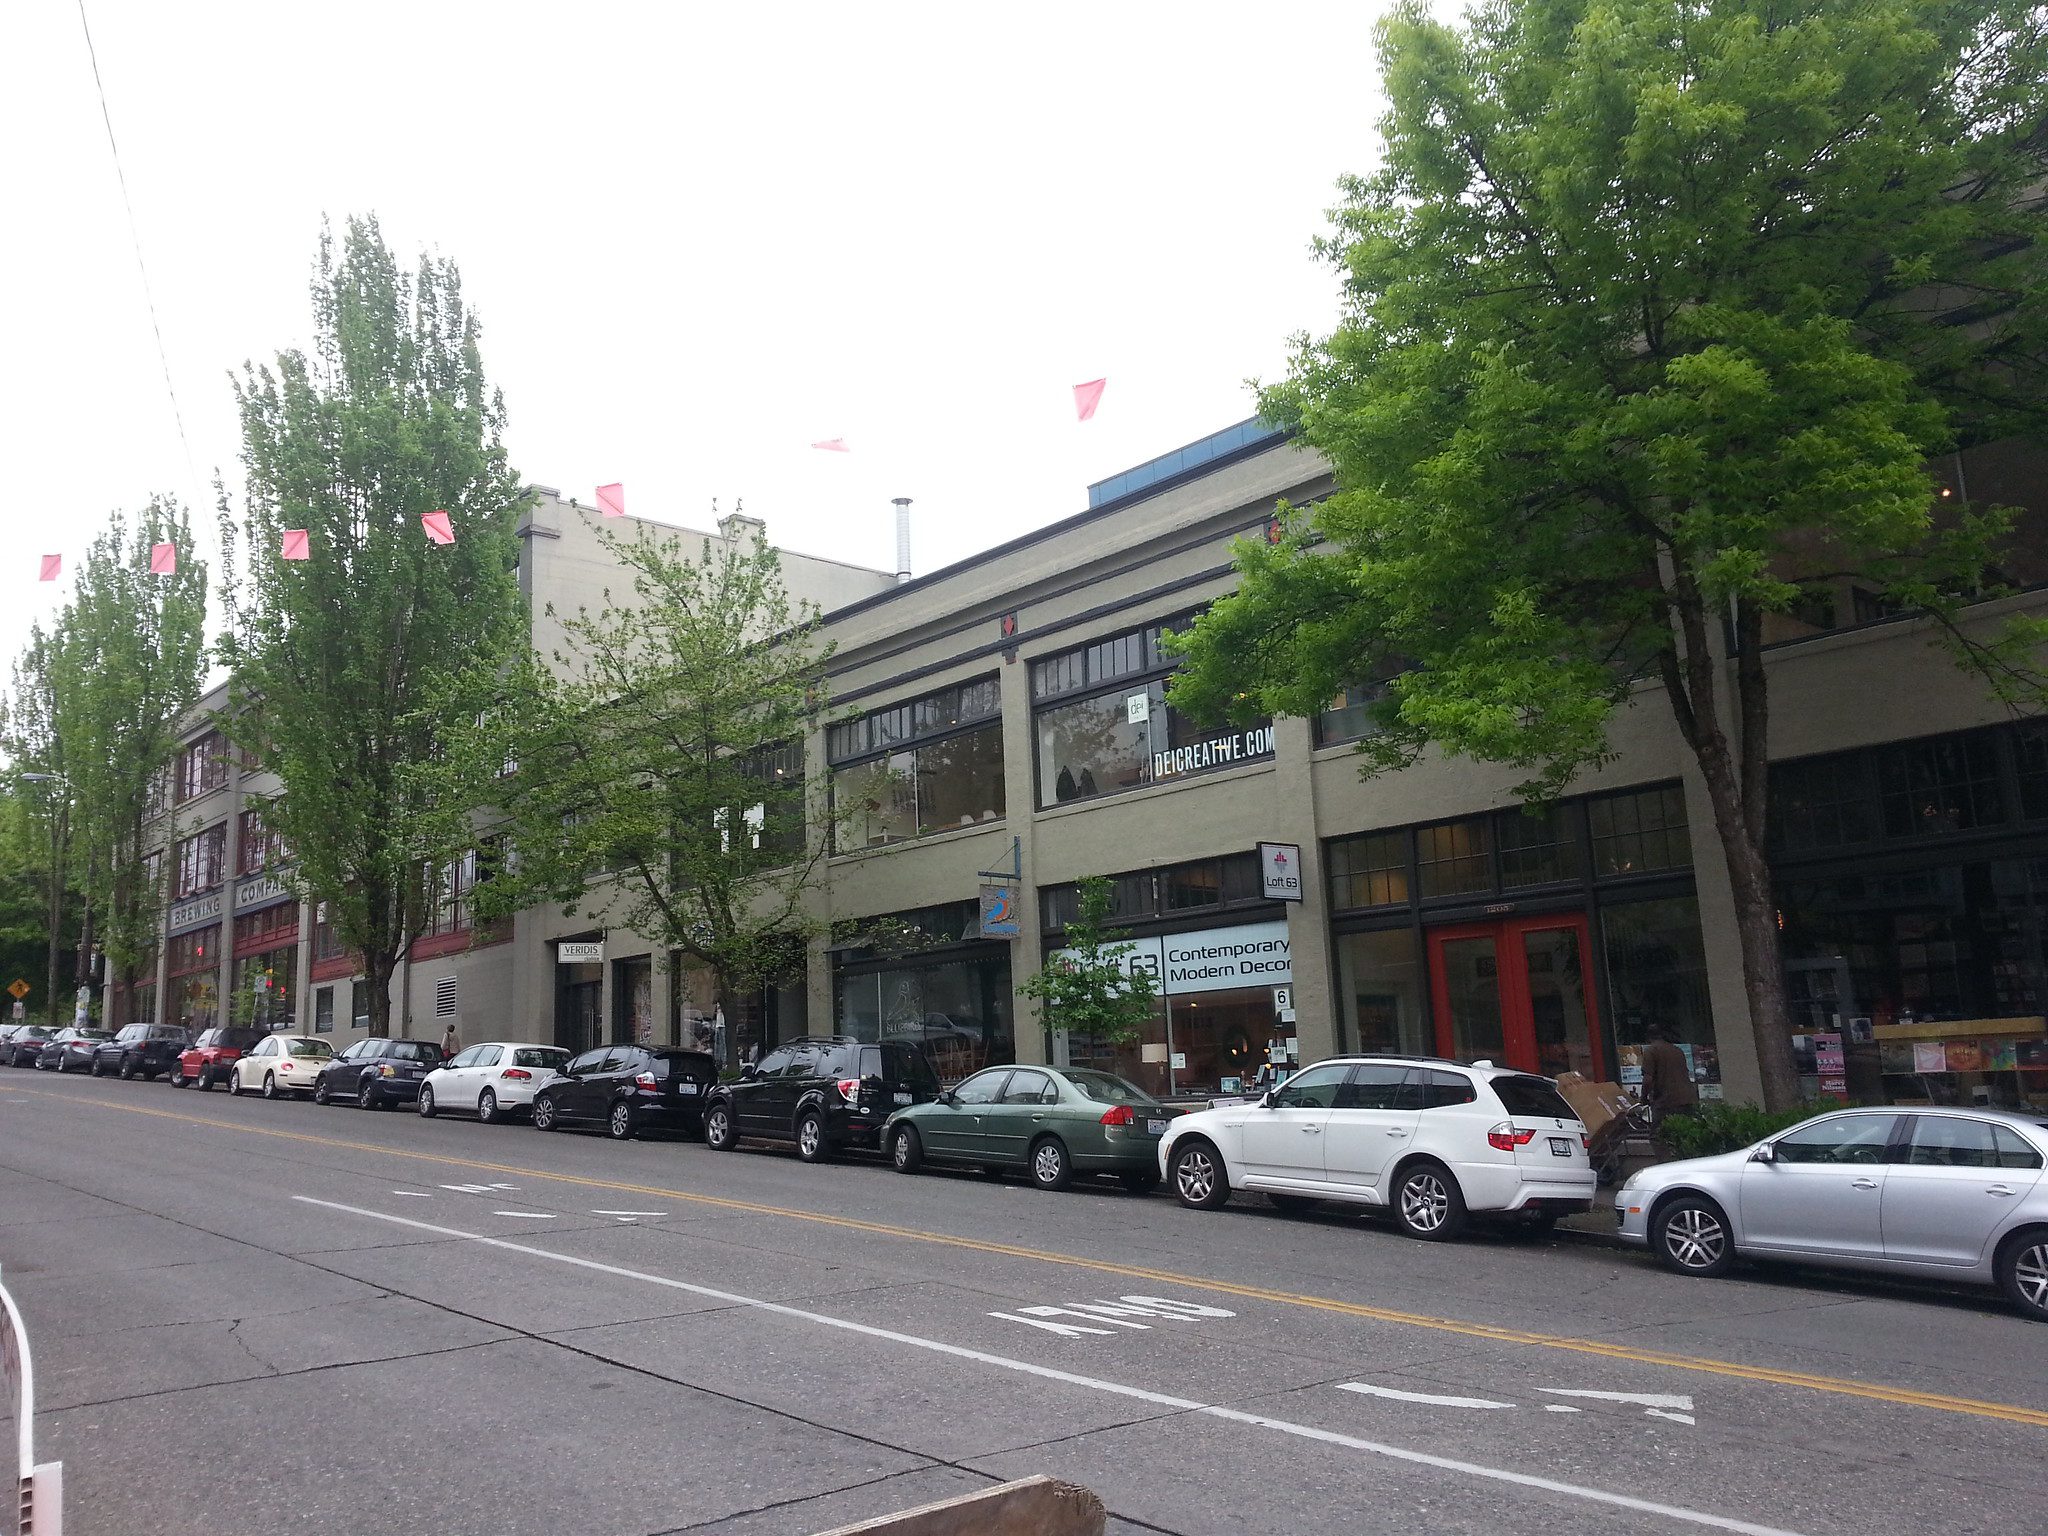 Photo of on-street paid parking in Seattle’s Capitol Hill neighborhood. Cars are lined up on the righthand curb spaces, parked in on-street paid parking spots near businesses in the area.